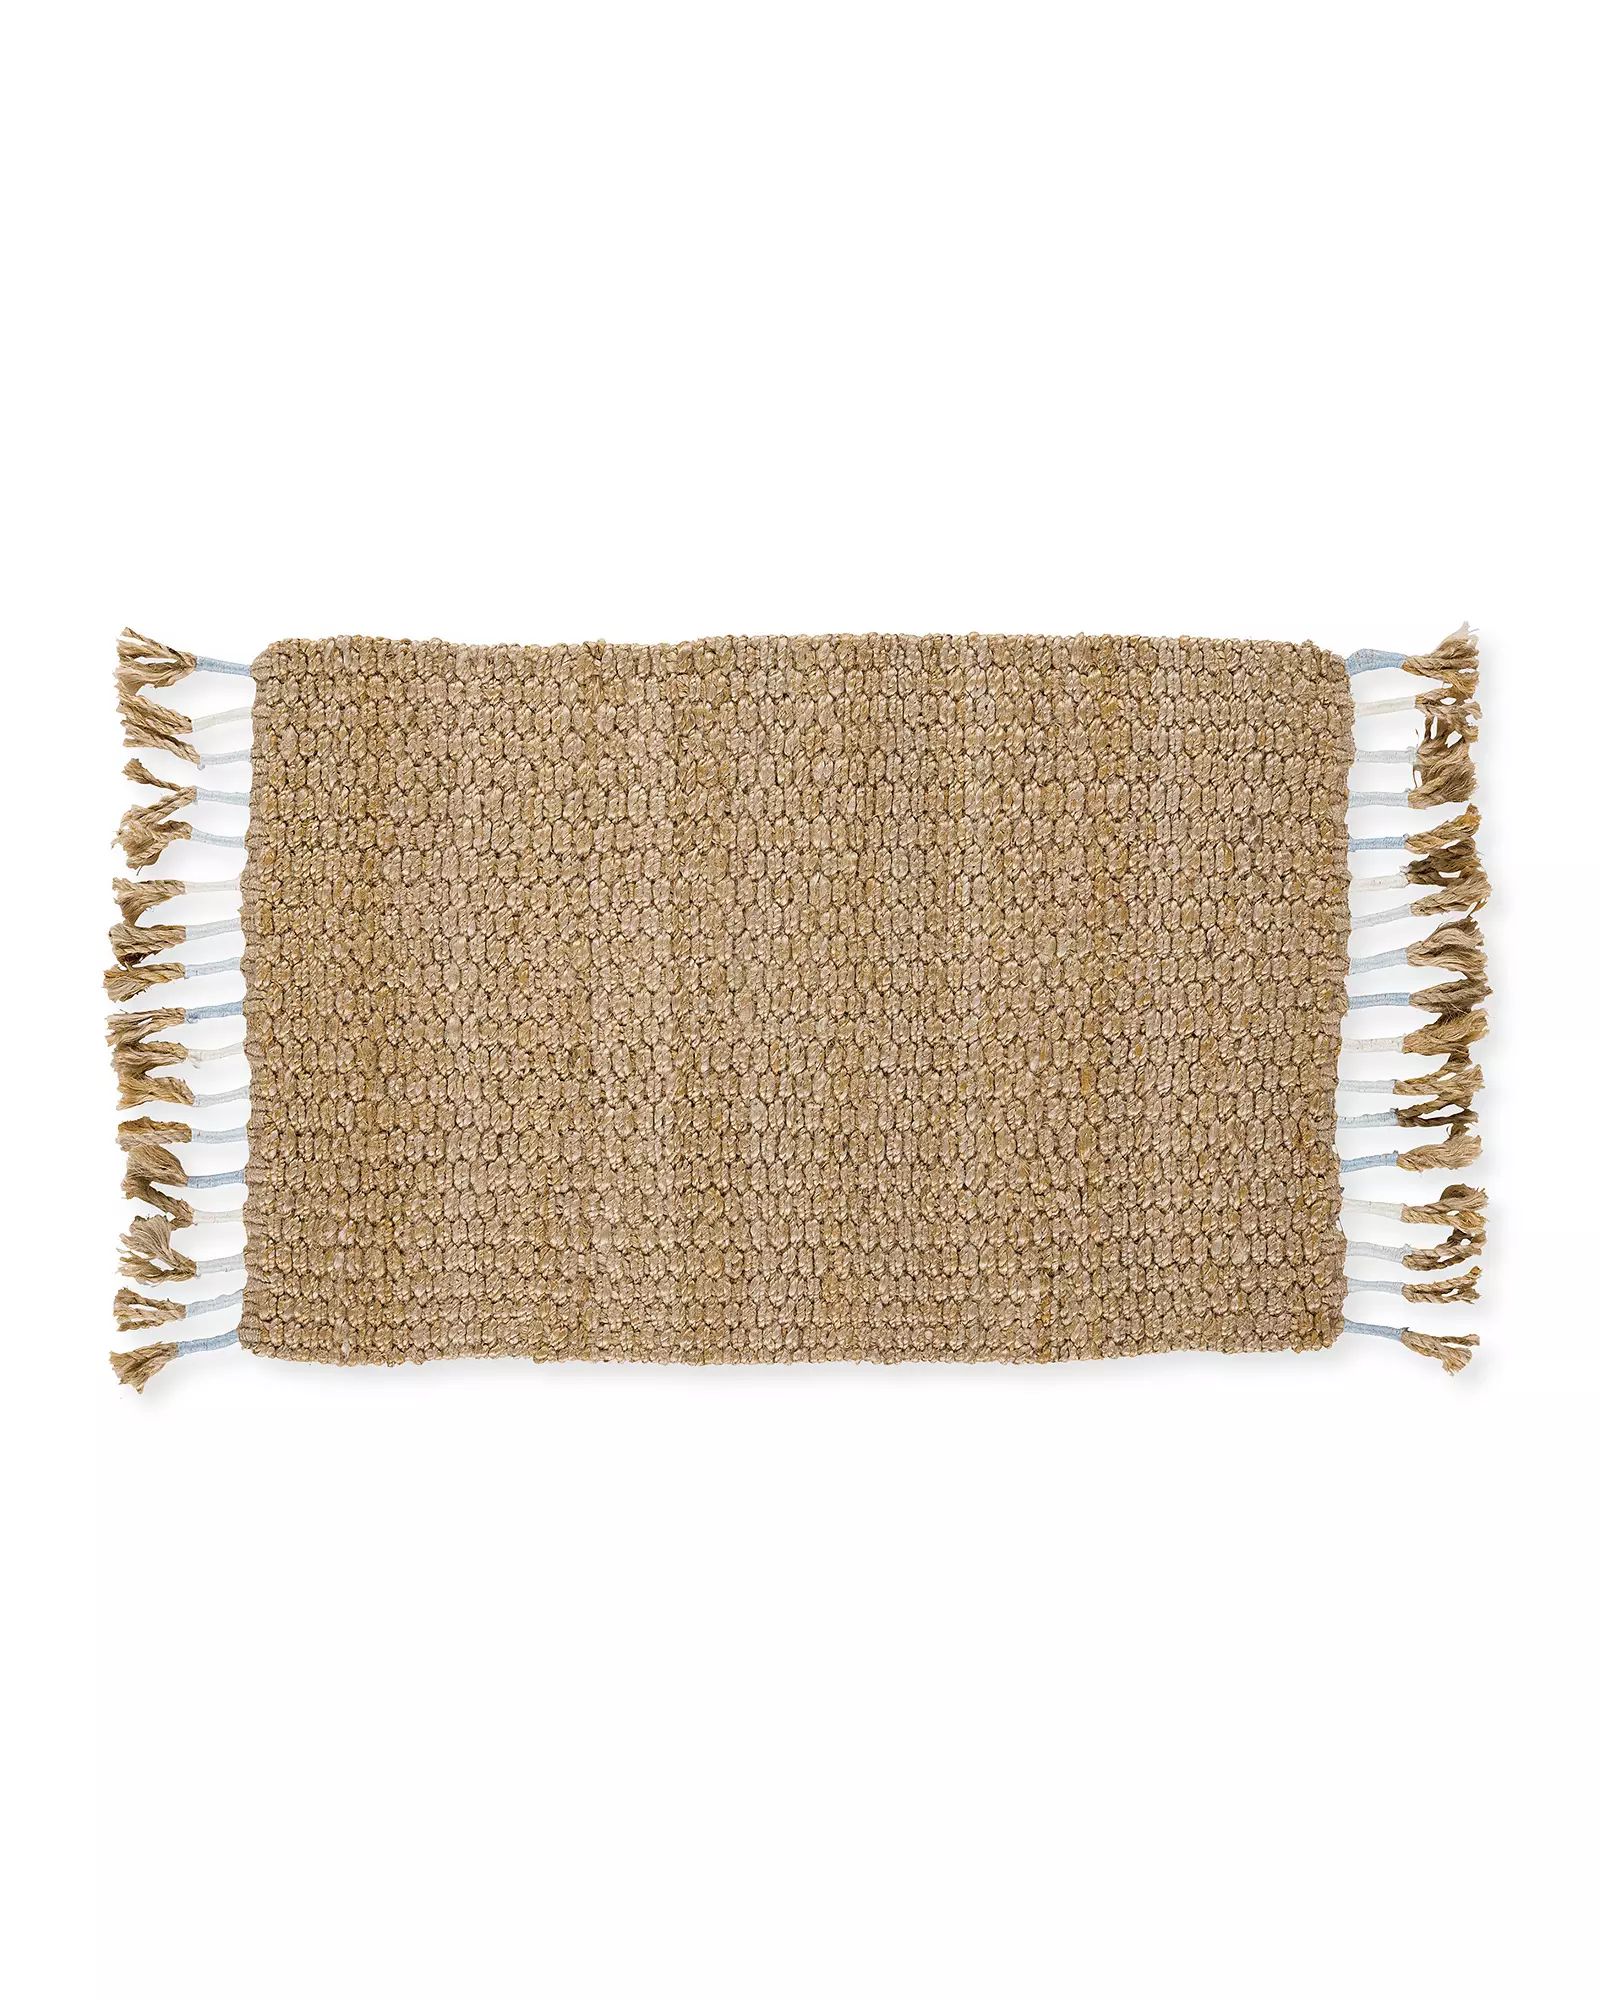 Fringed Jute Mat | Serena and Lily